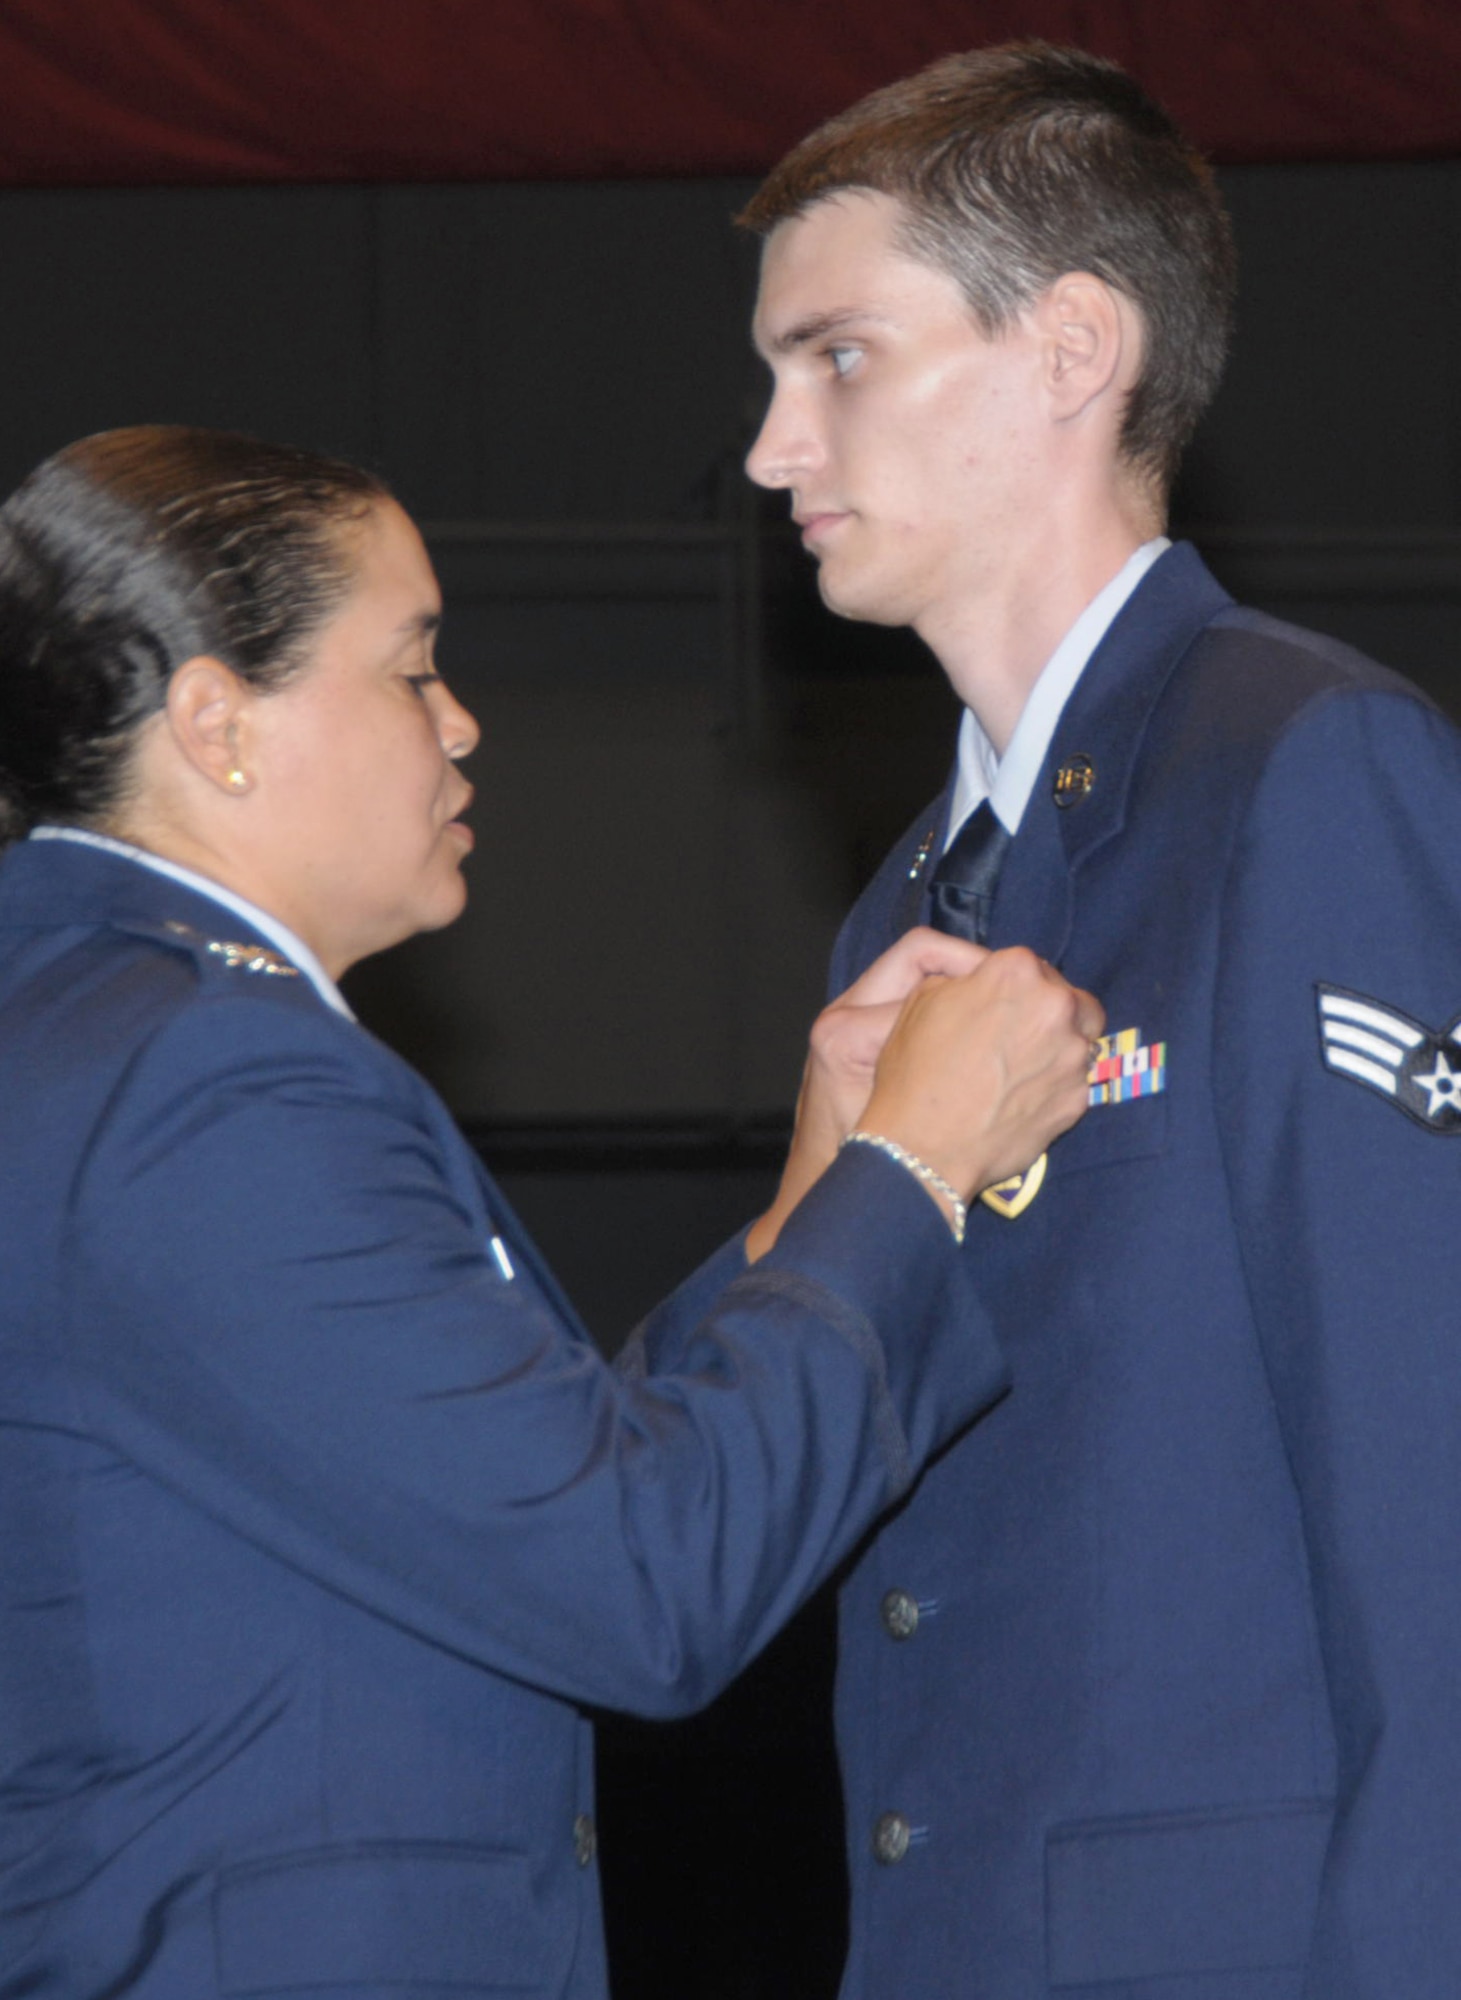 Col. Amanda Gladney pins a Purple Heart on the chest of Senior Airman Tre Porfirio July 8, 2010, at the National Museum of the U.S. Air Force in Dayton, Ohio, during the 15th Heroes Welcoming Heroes event. Airman Porfirio passed away Nov. 28, 2010, while visiting friends. Airman Porfirio was a voice network systems technician with the 88th Communication Squadron. Colonel Gladney is the 88th ABW commander. (U.S. Air Force photo/Al Bright)